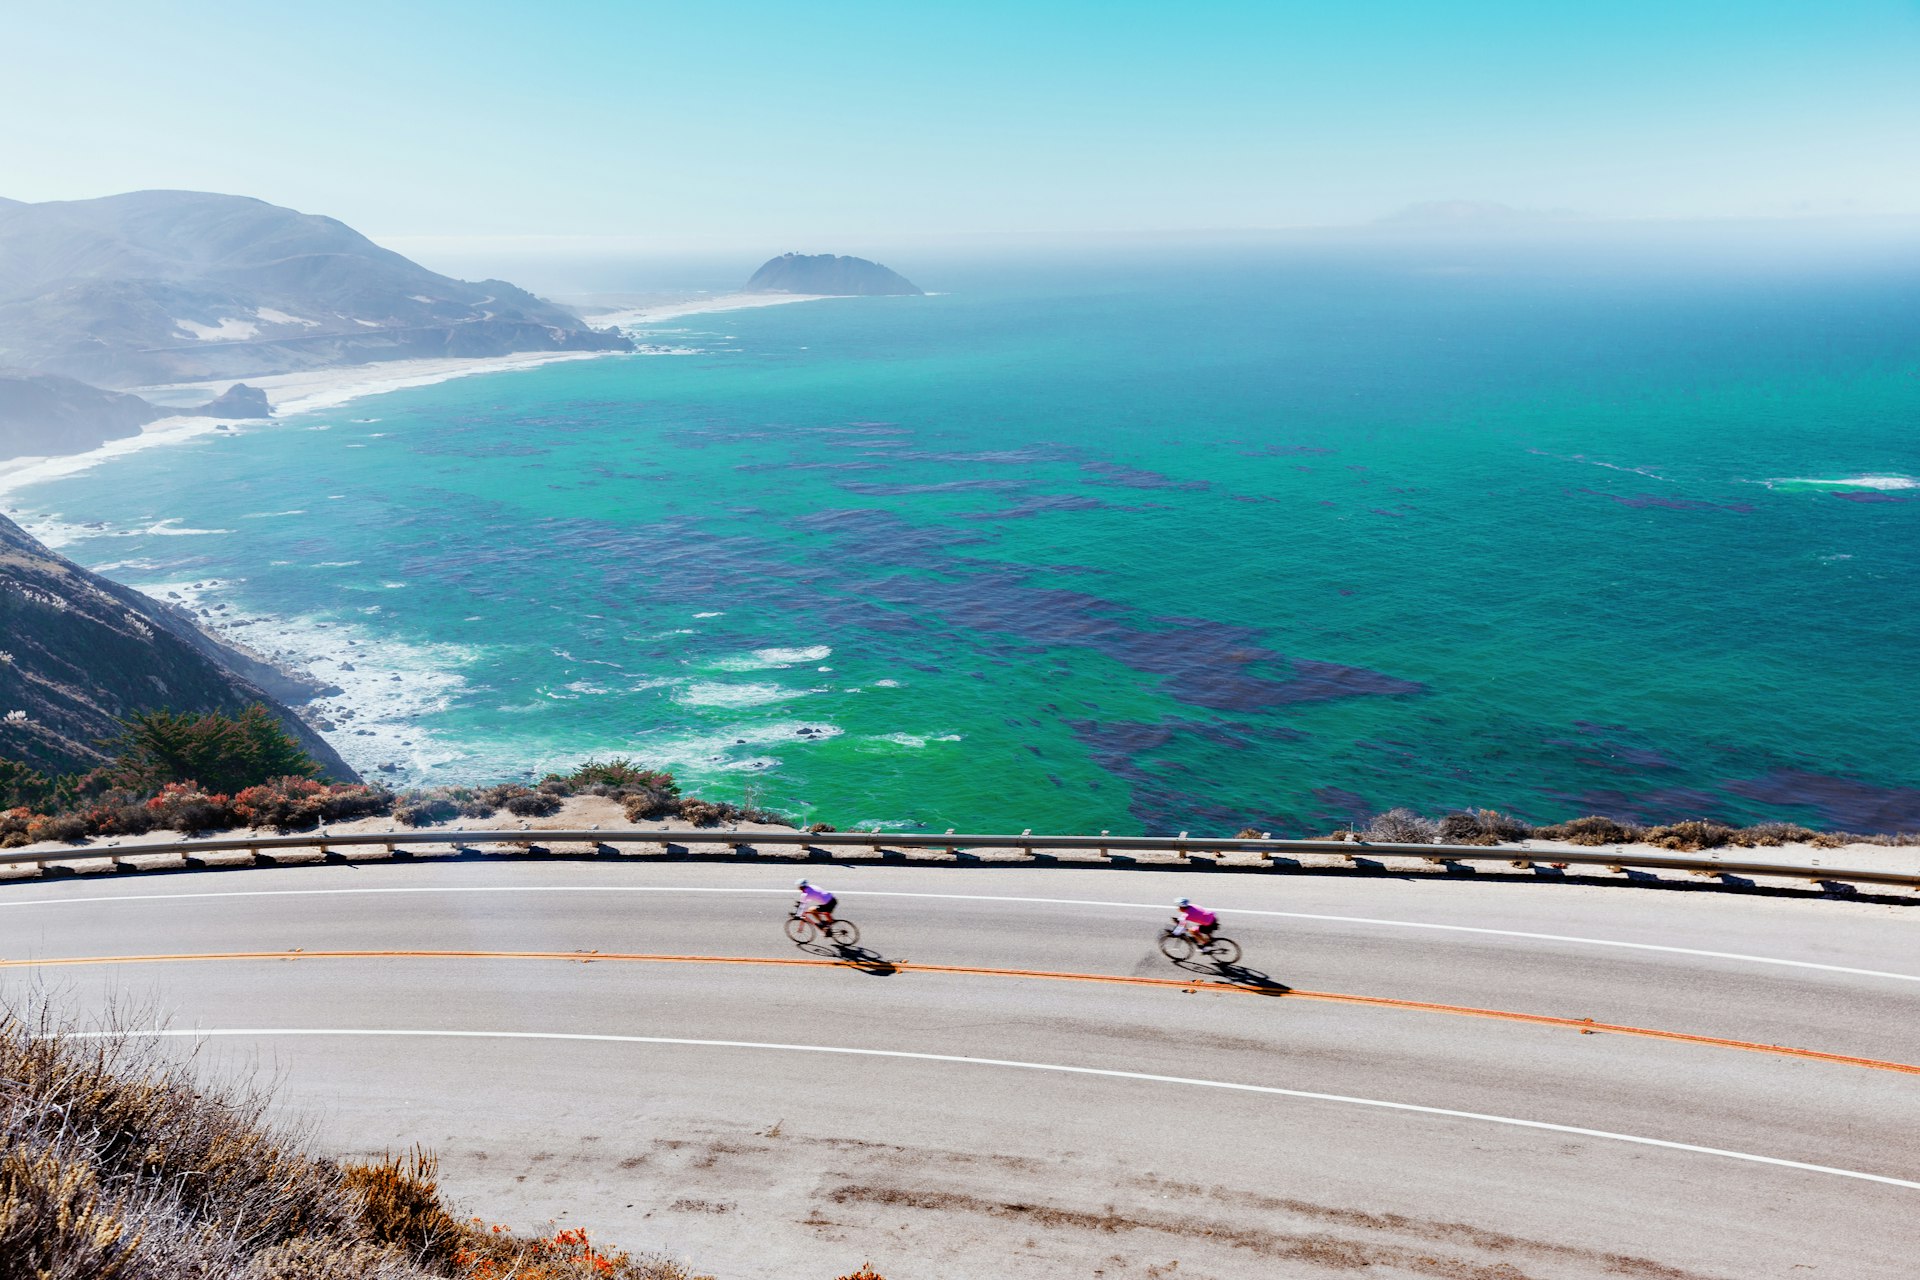 Two cyclists on Highway 1 on the Big Sur Pacific Coast of California.